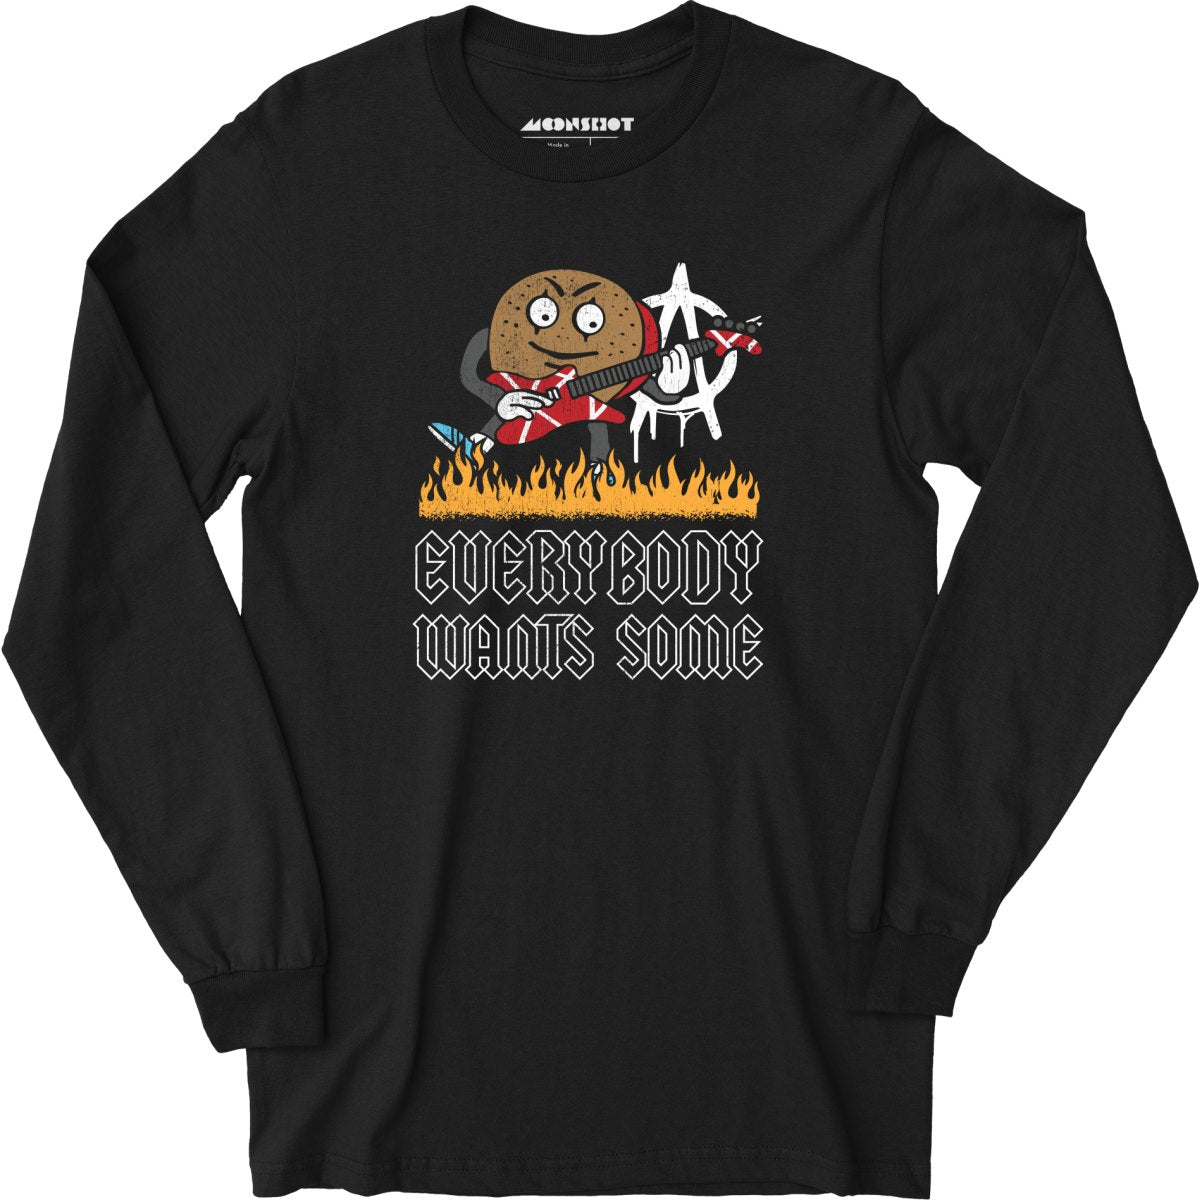 Everybody Wants Some - Long Sleeve T-Shirt